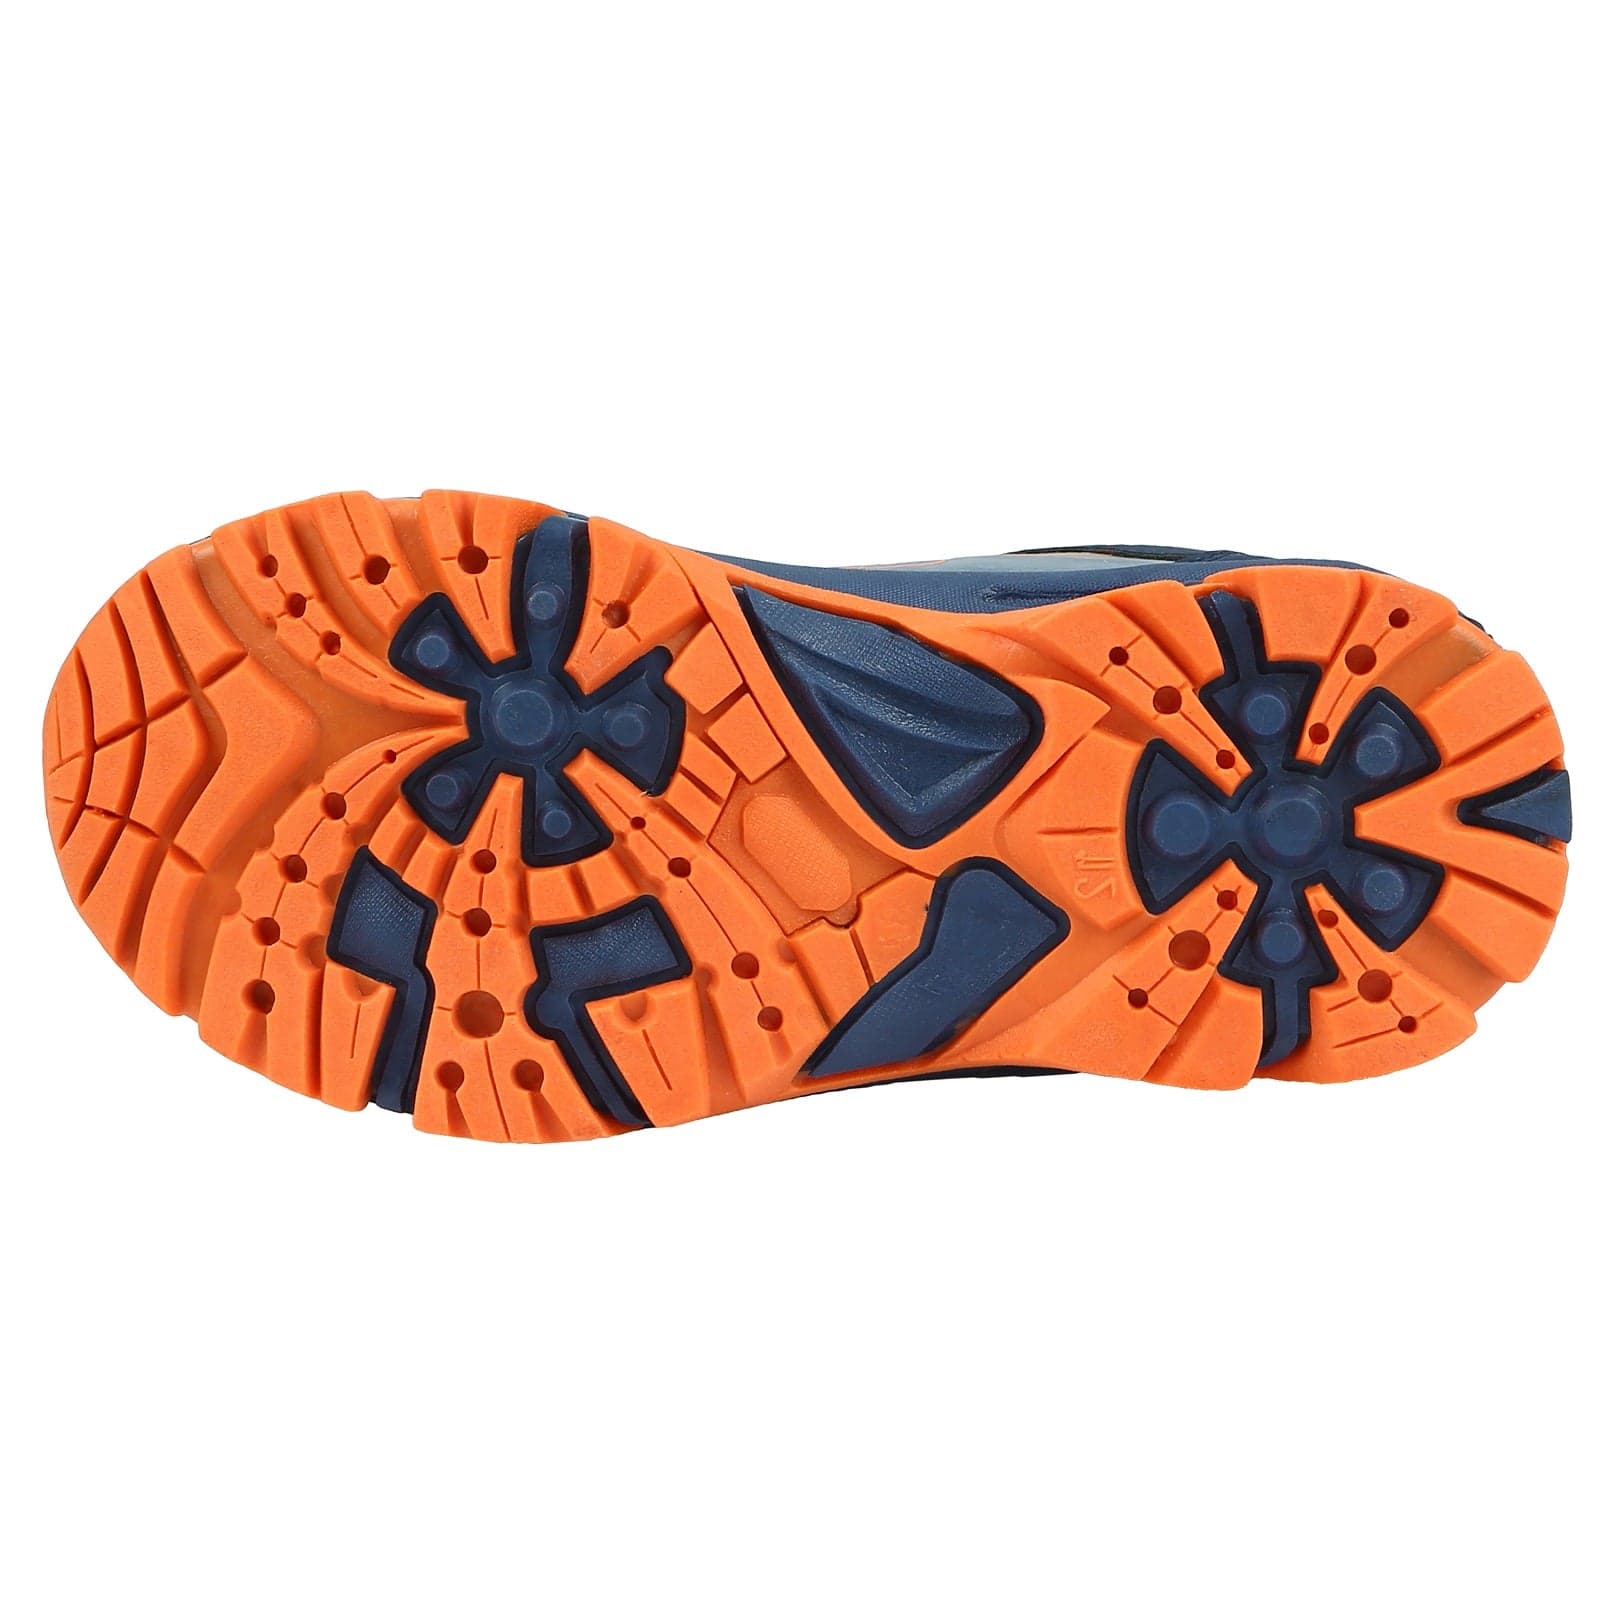 traction hiking shoes for kids